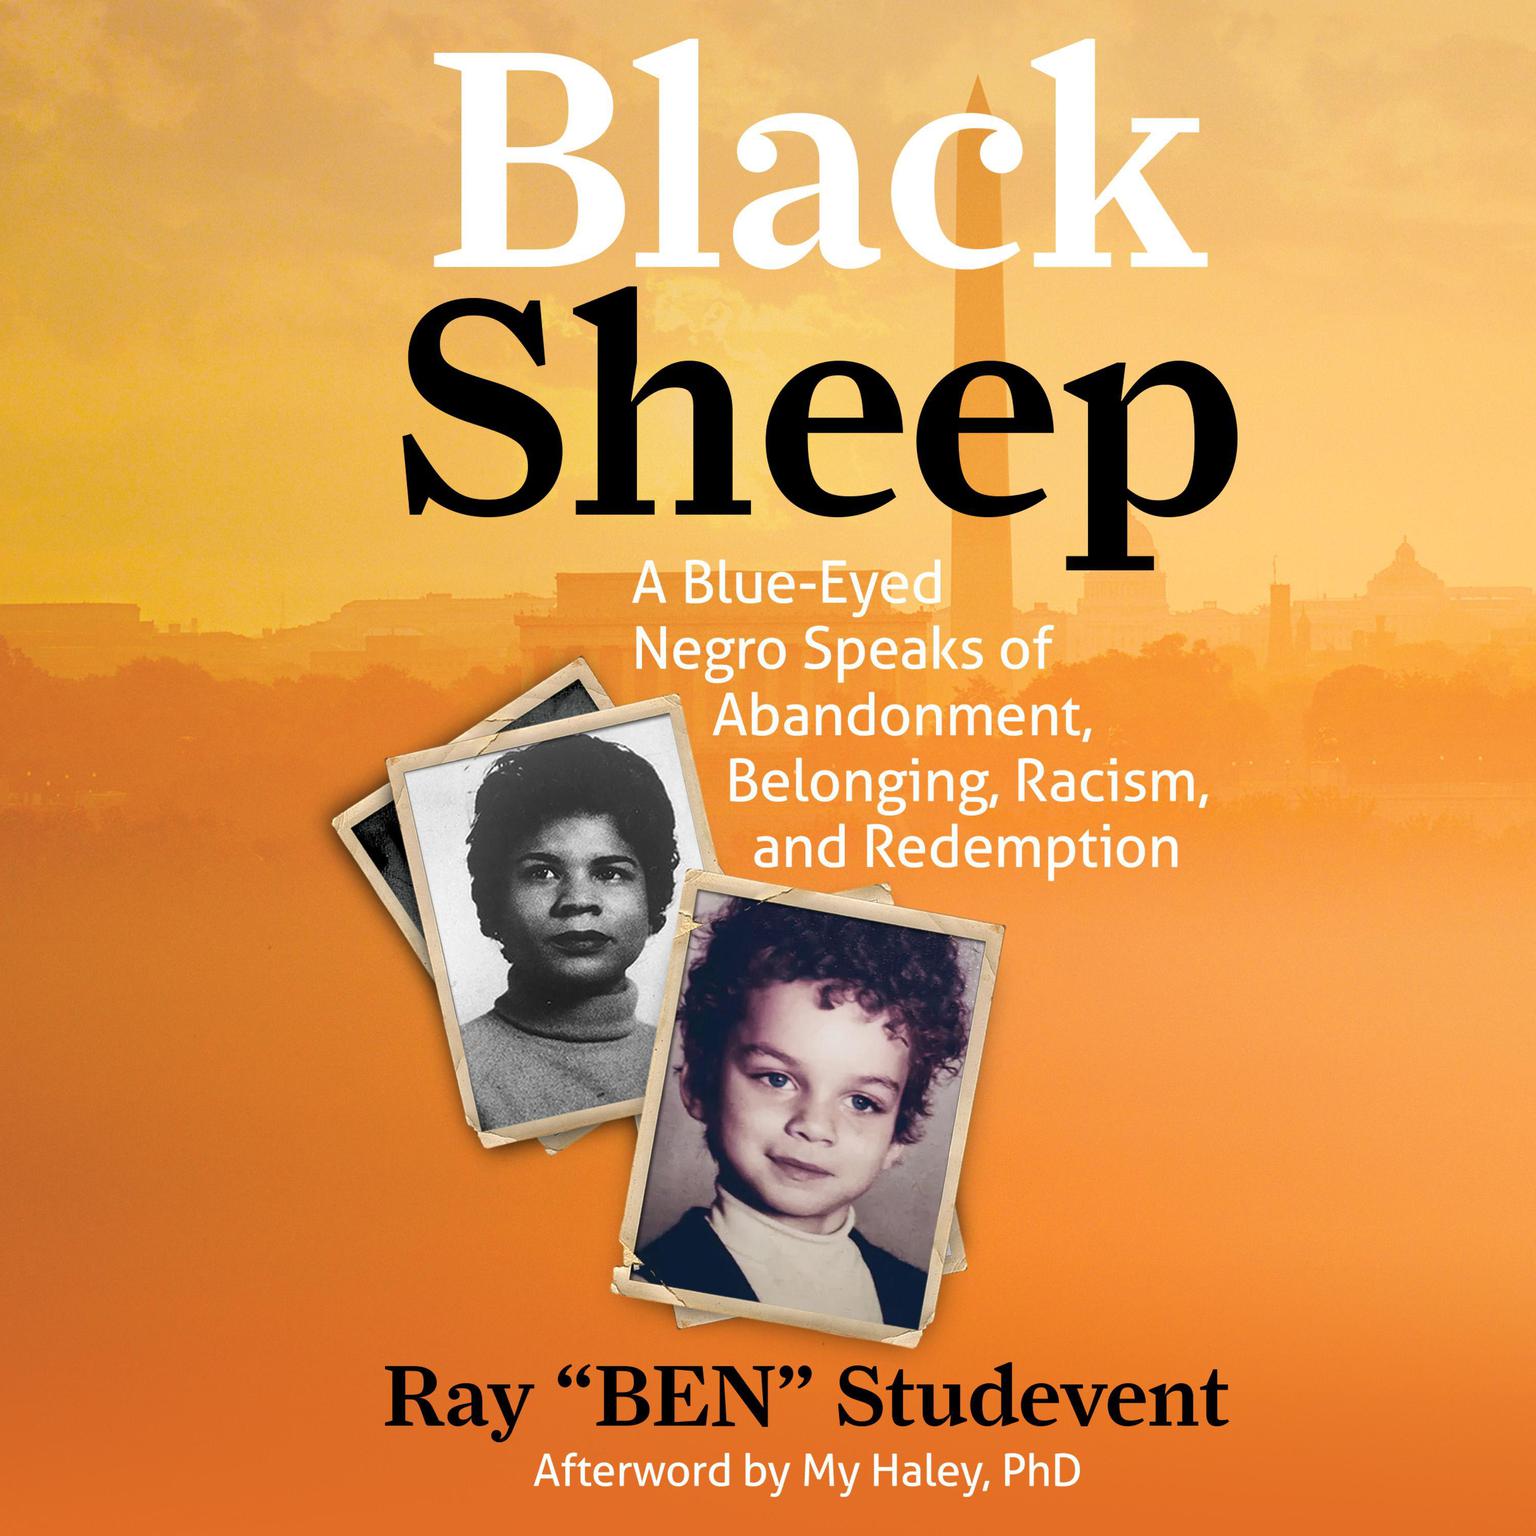 Black Sheep: A Blue-Eyed Negro Speaks of Abandonment, Belonging, Racism, and Redemption Audiobook, by Ray Studevent